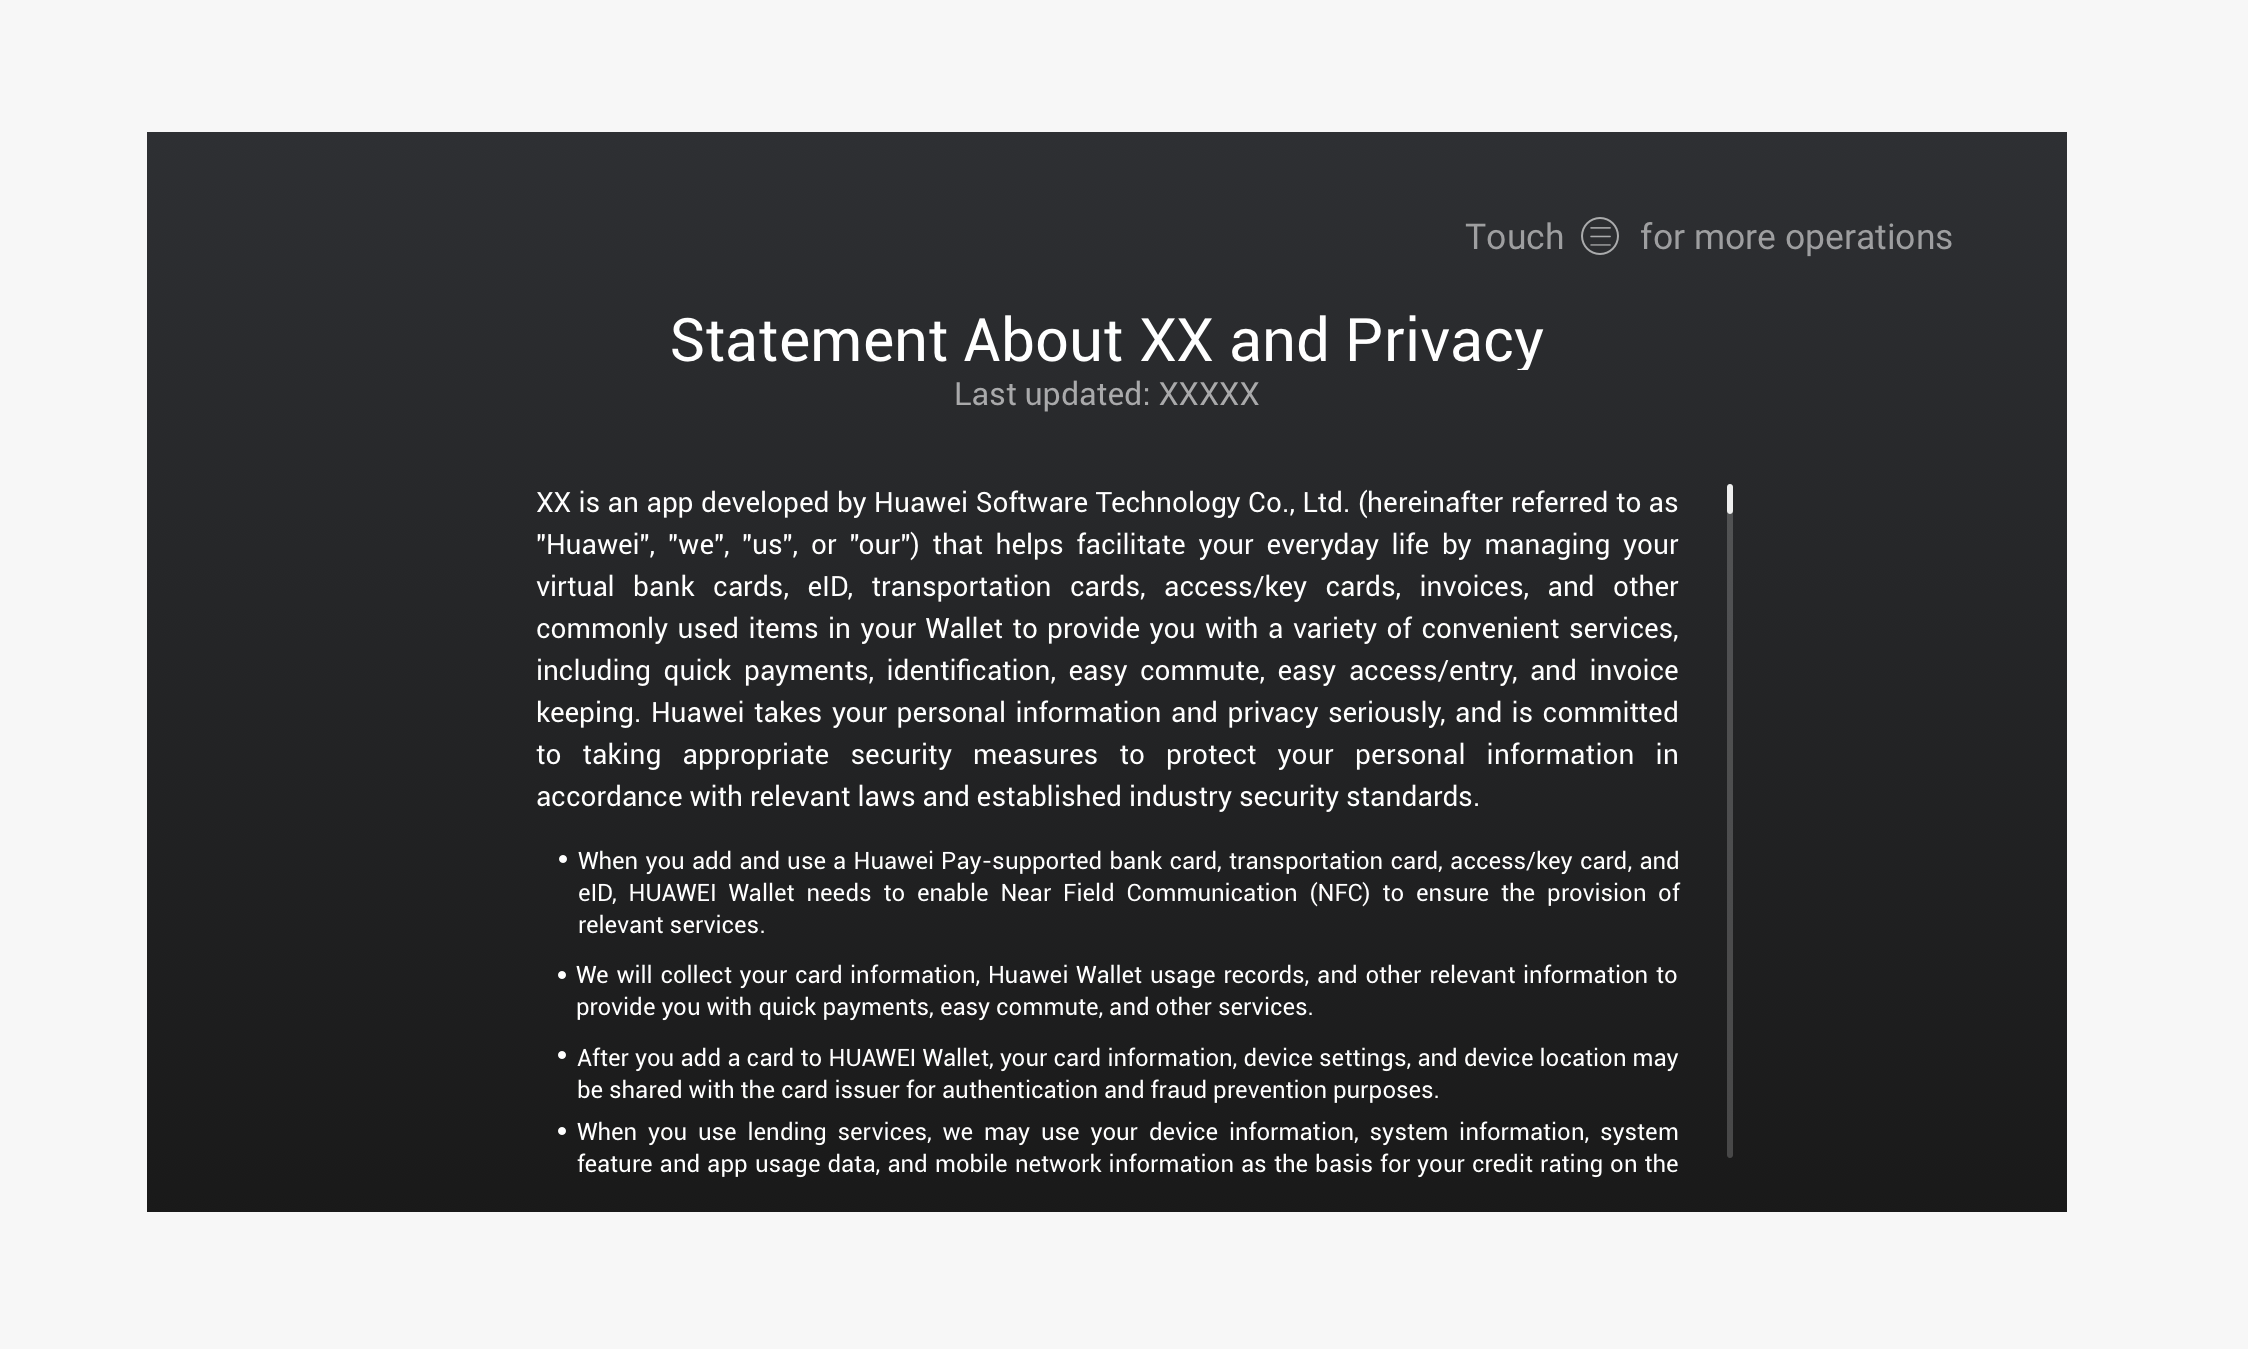 docs-en/security/figures/example-of-a-dialog-box-showing-a-privacy-notice-or-statement.png